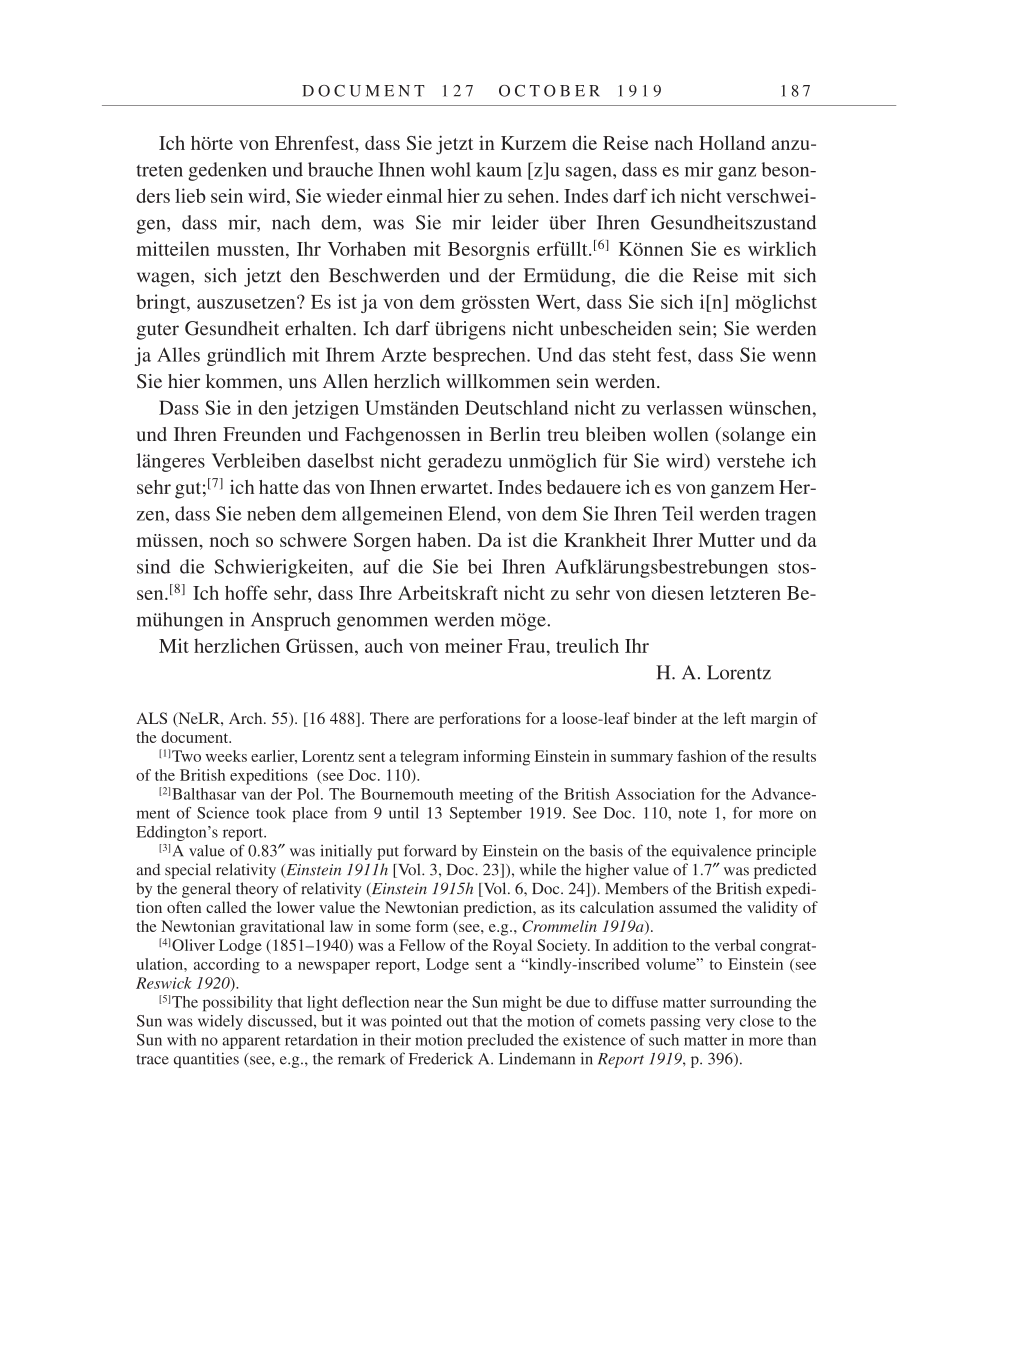 Volume 9: The Berlin Years: Correspondence January 1919-April 1920 page 187